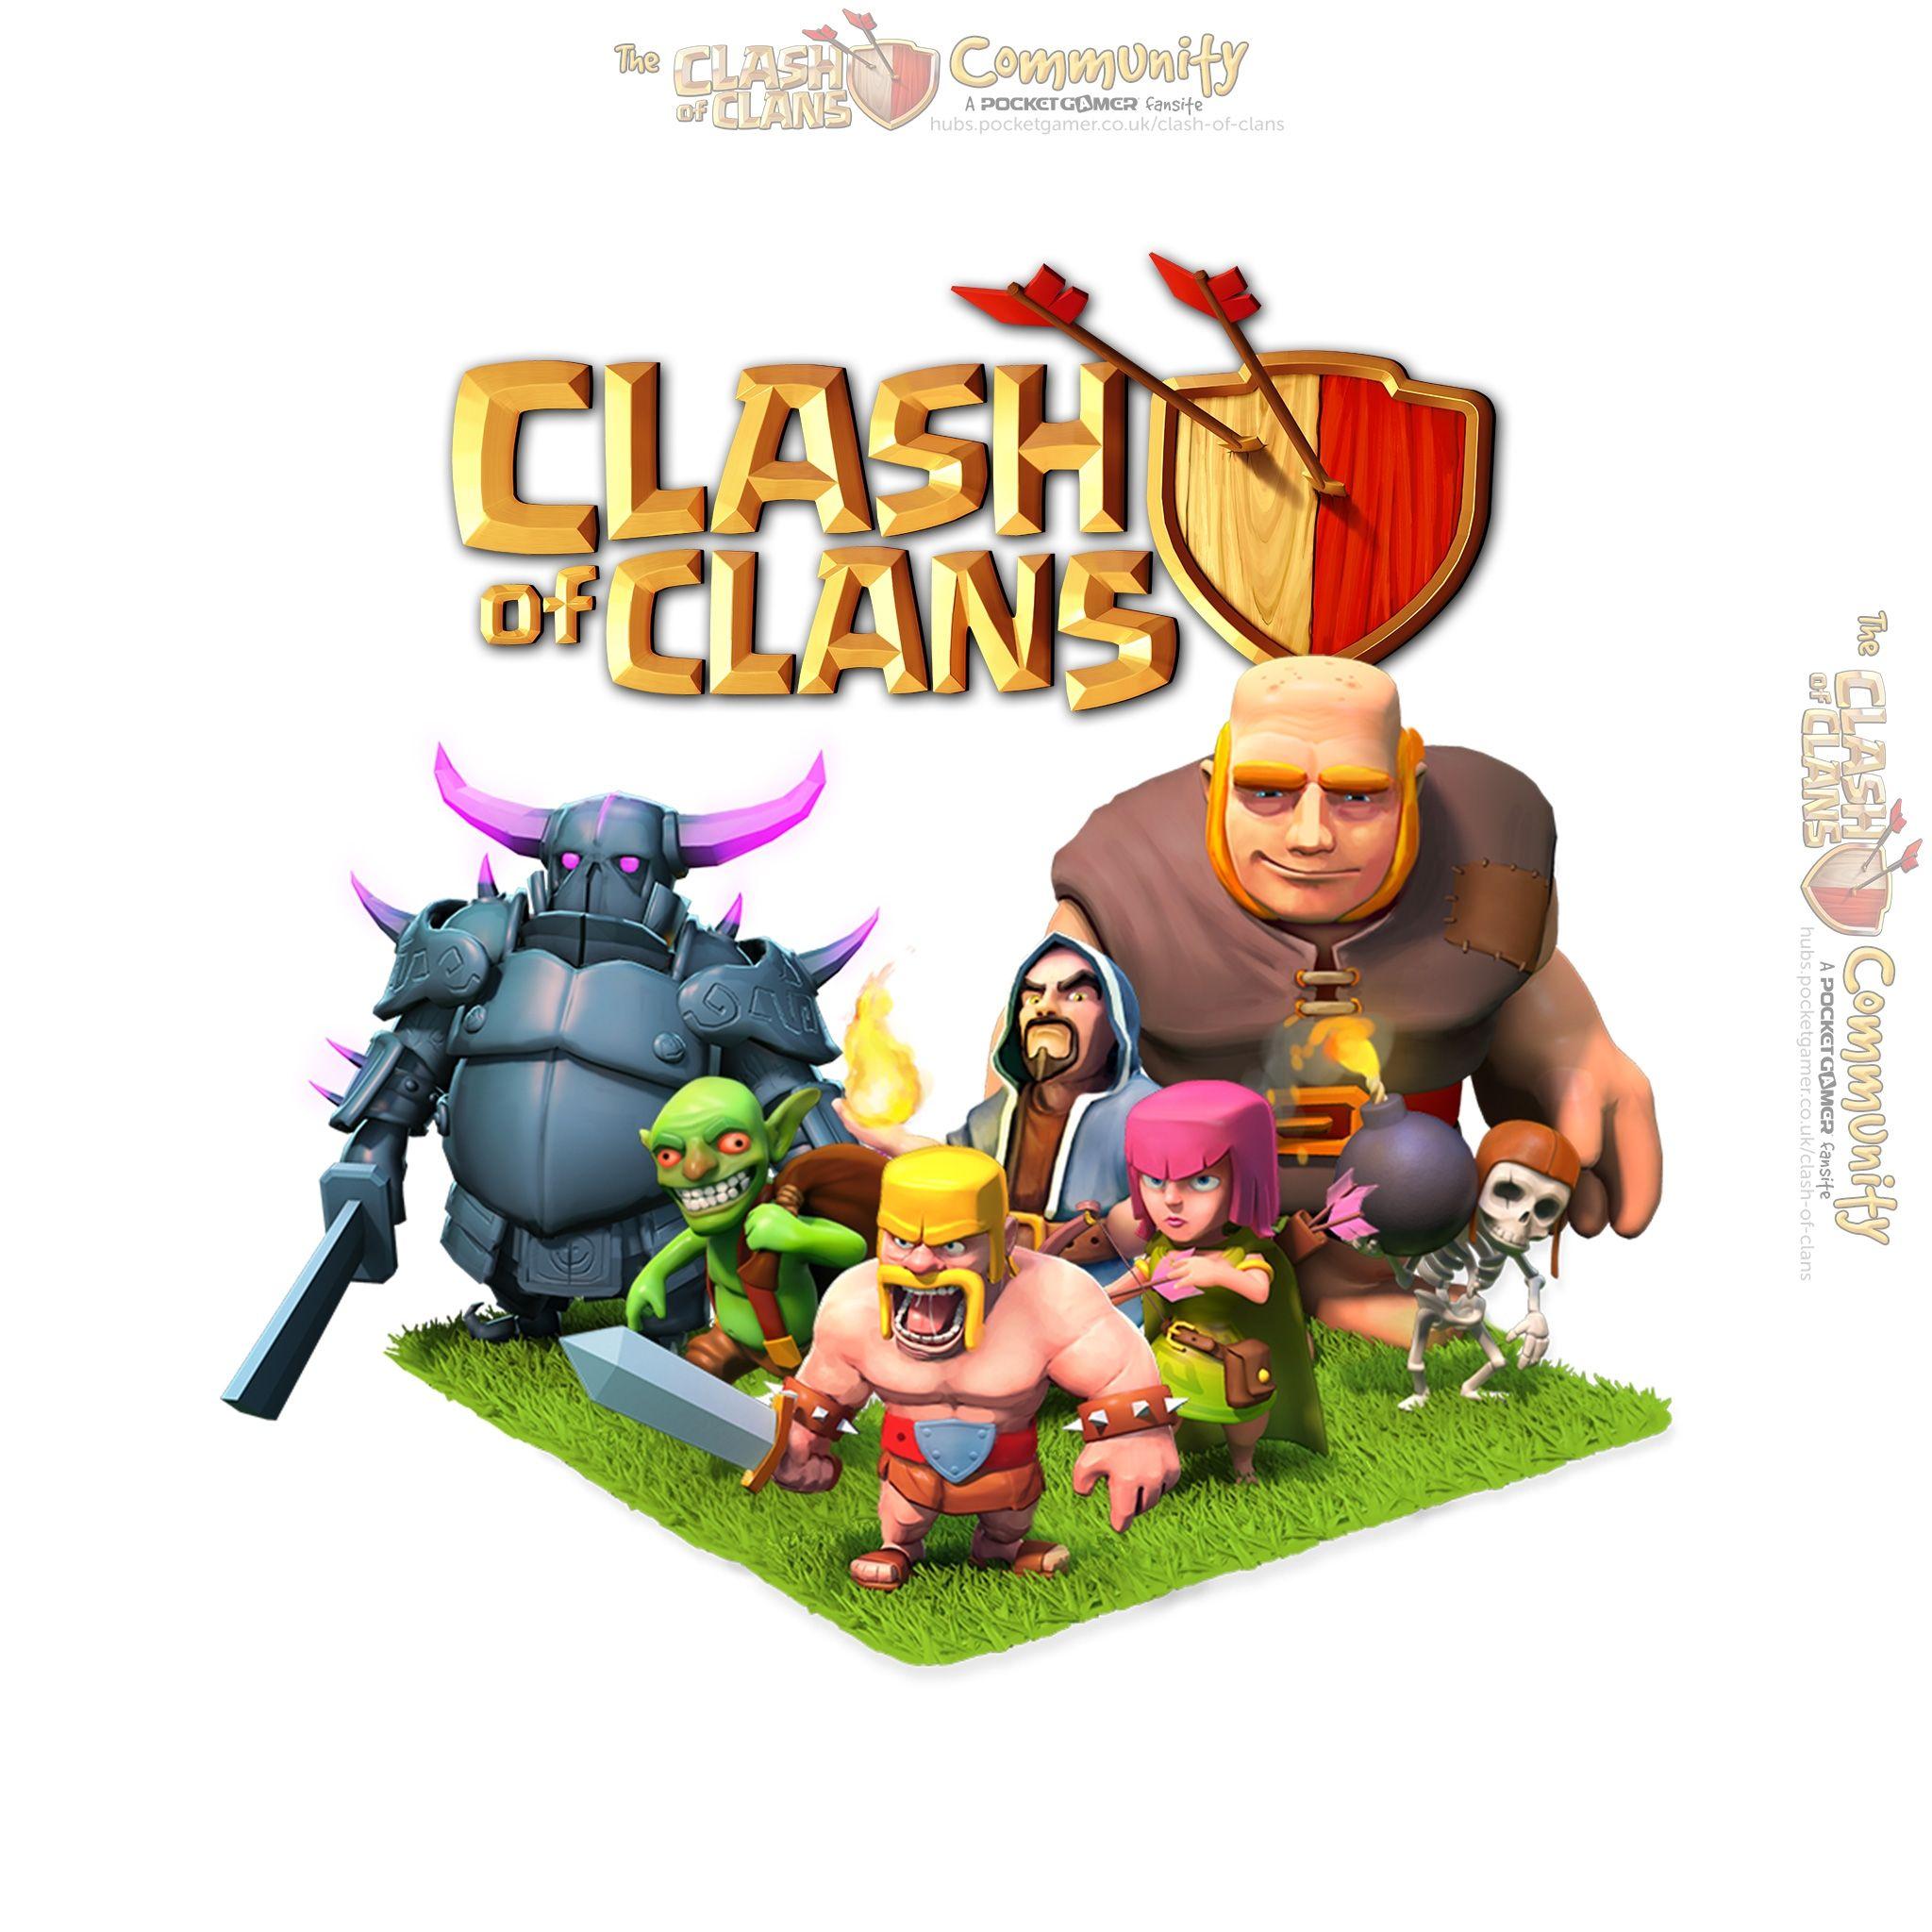 Clash of Clans troops of Clans Wallpaper (2048x2048)